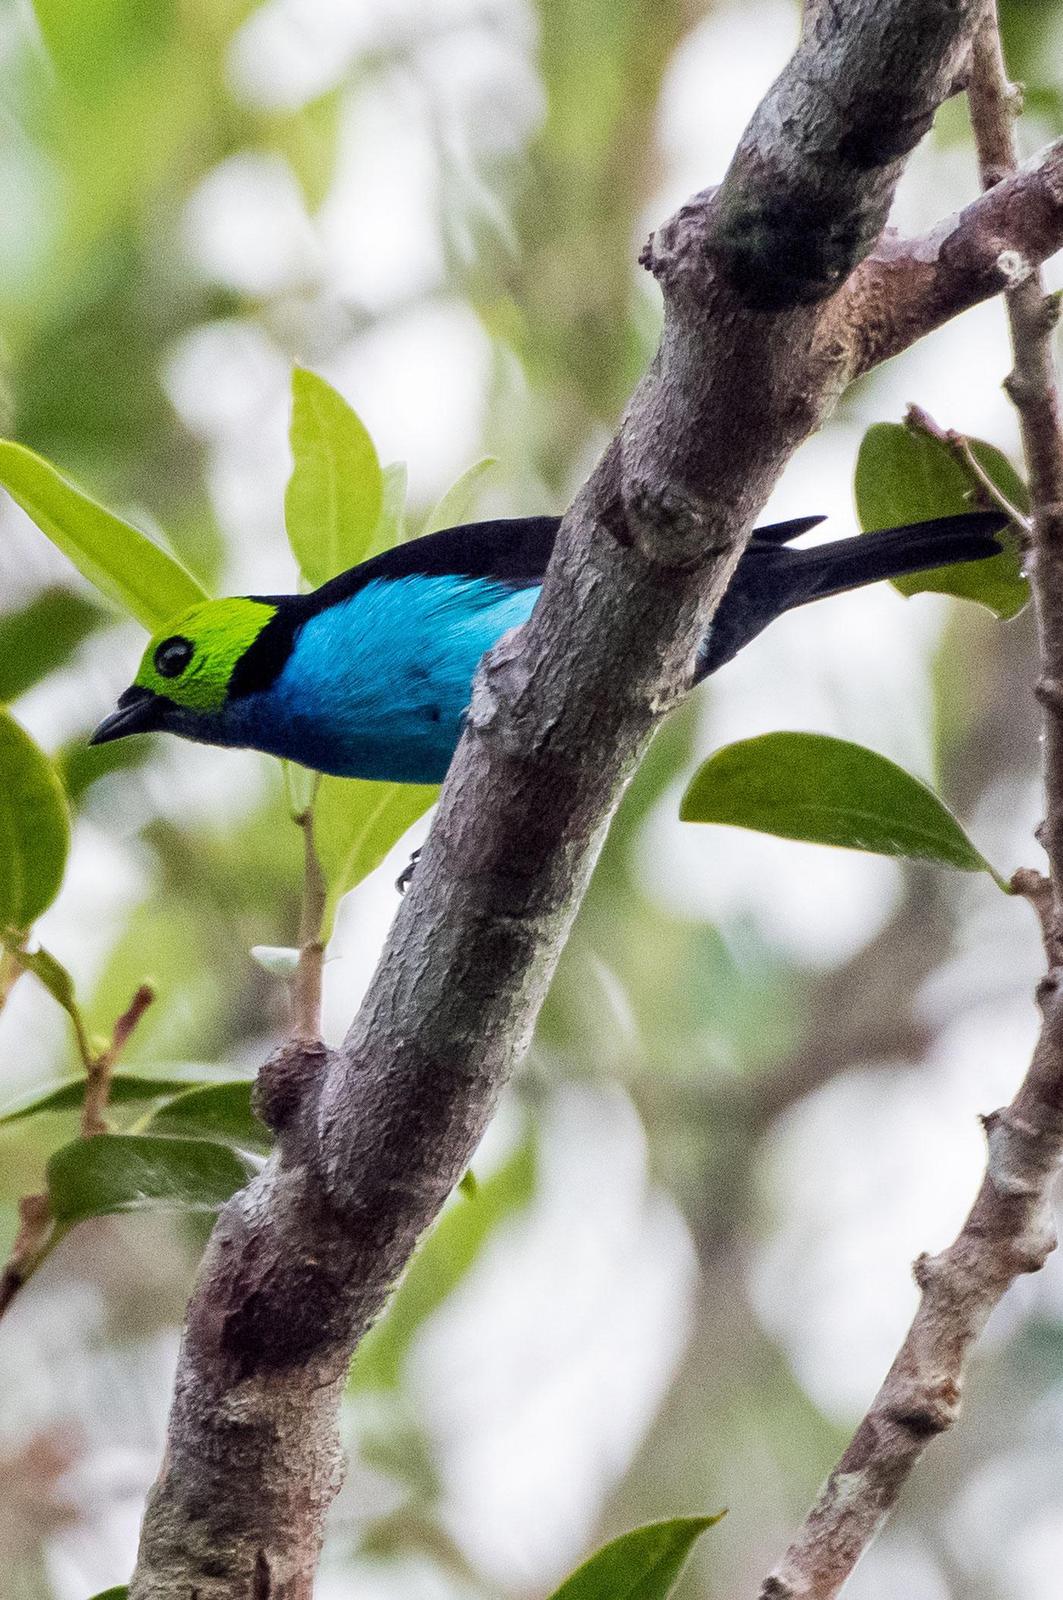 Paradise Tanager Photo by Phil Kahler